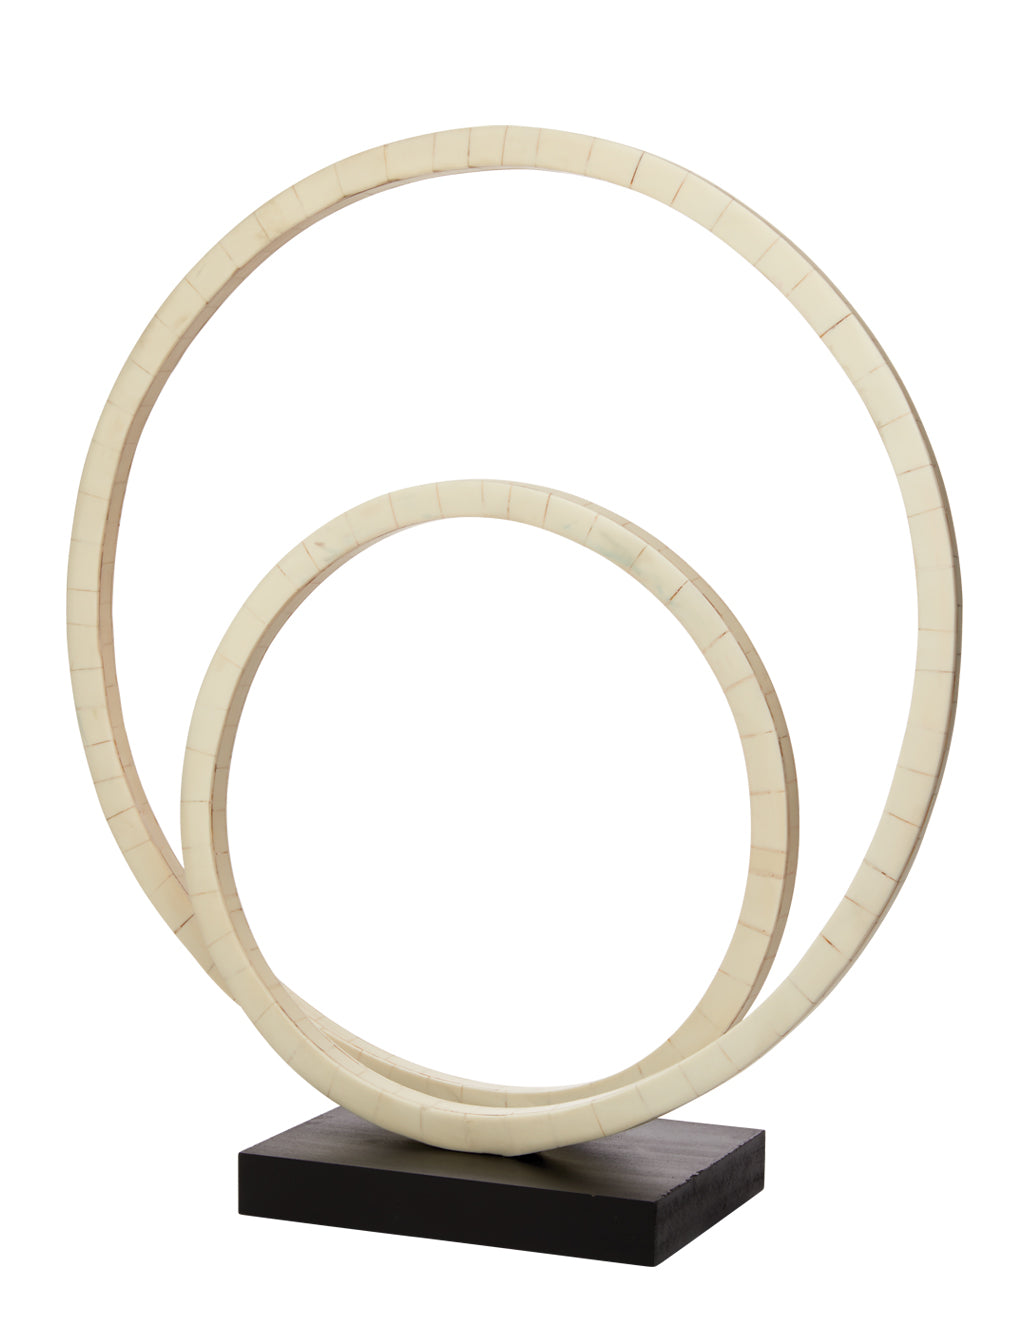 Helix Double Ring Sculpture in Natural Bone